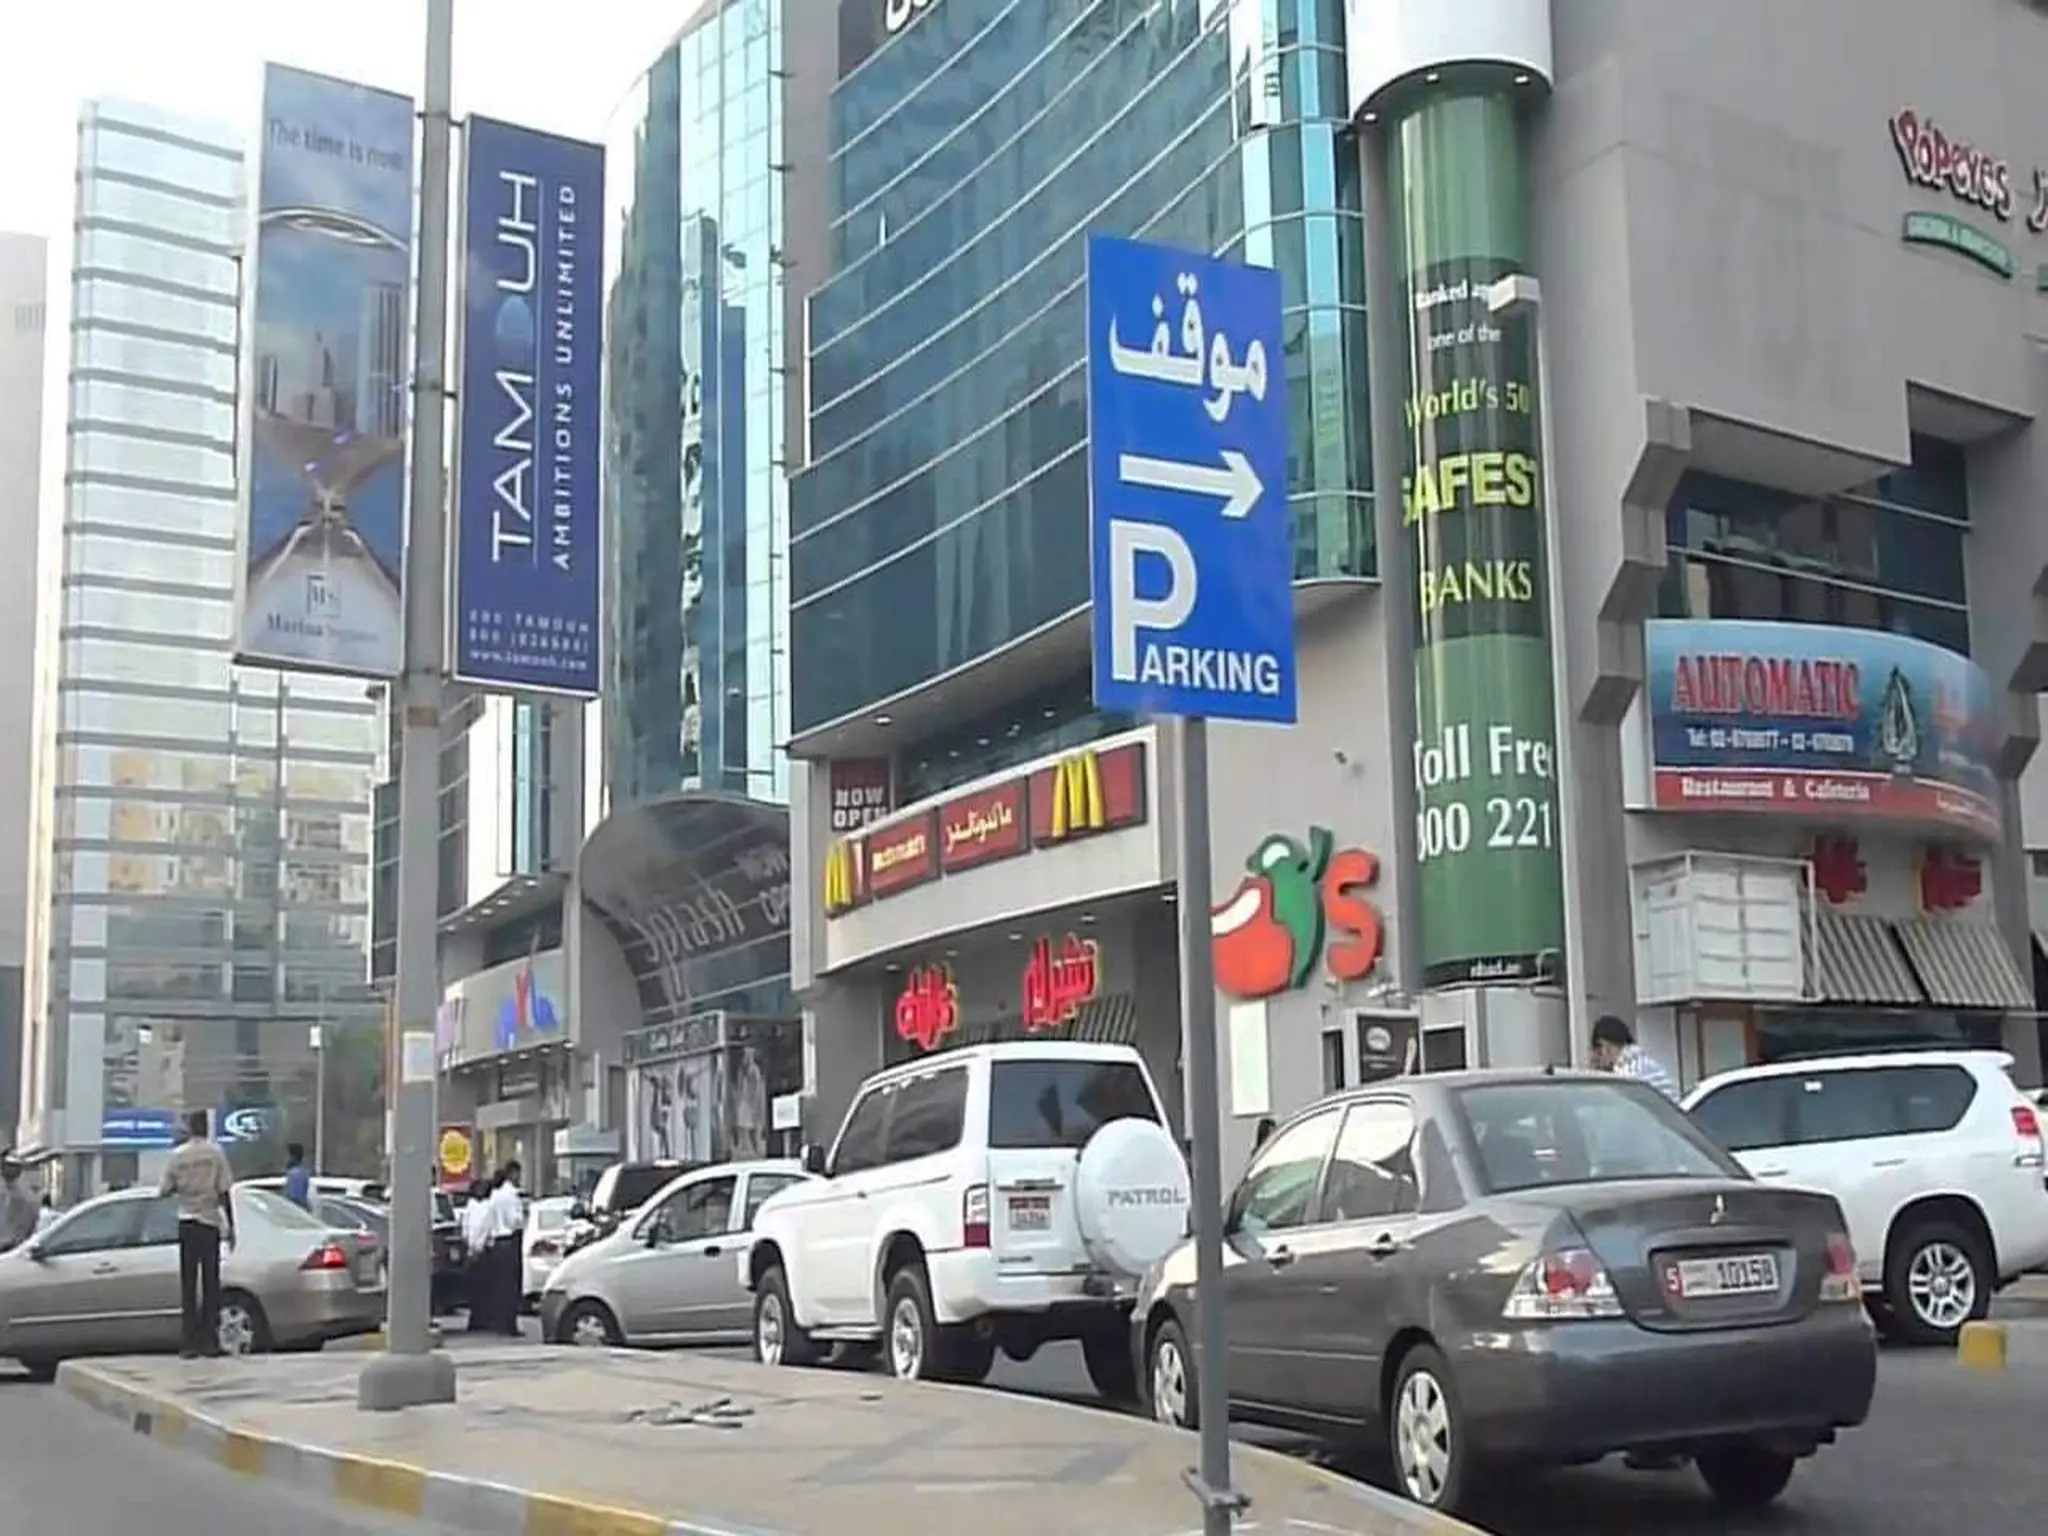 Urgent: Announcing free parking in Abu Dhabi and a statement from “Dubai Roads”